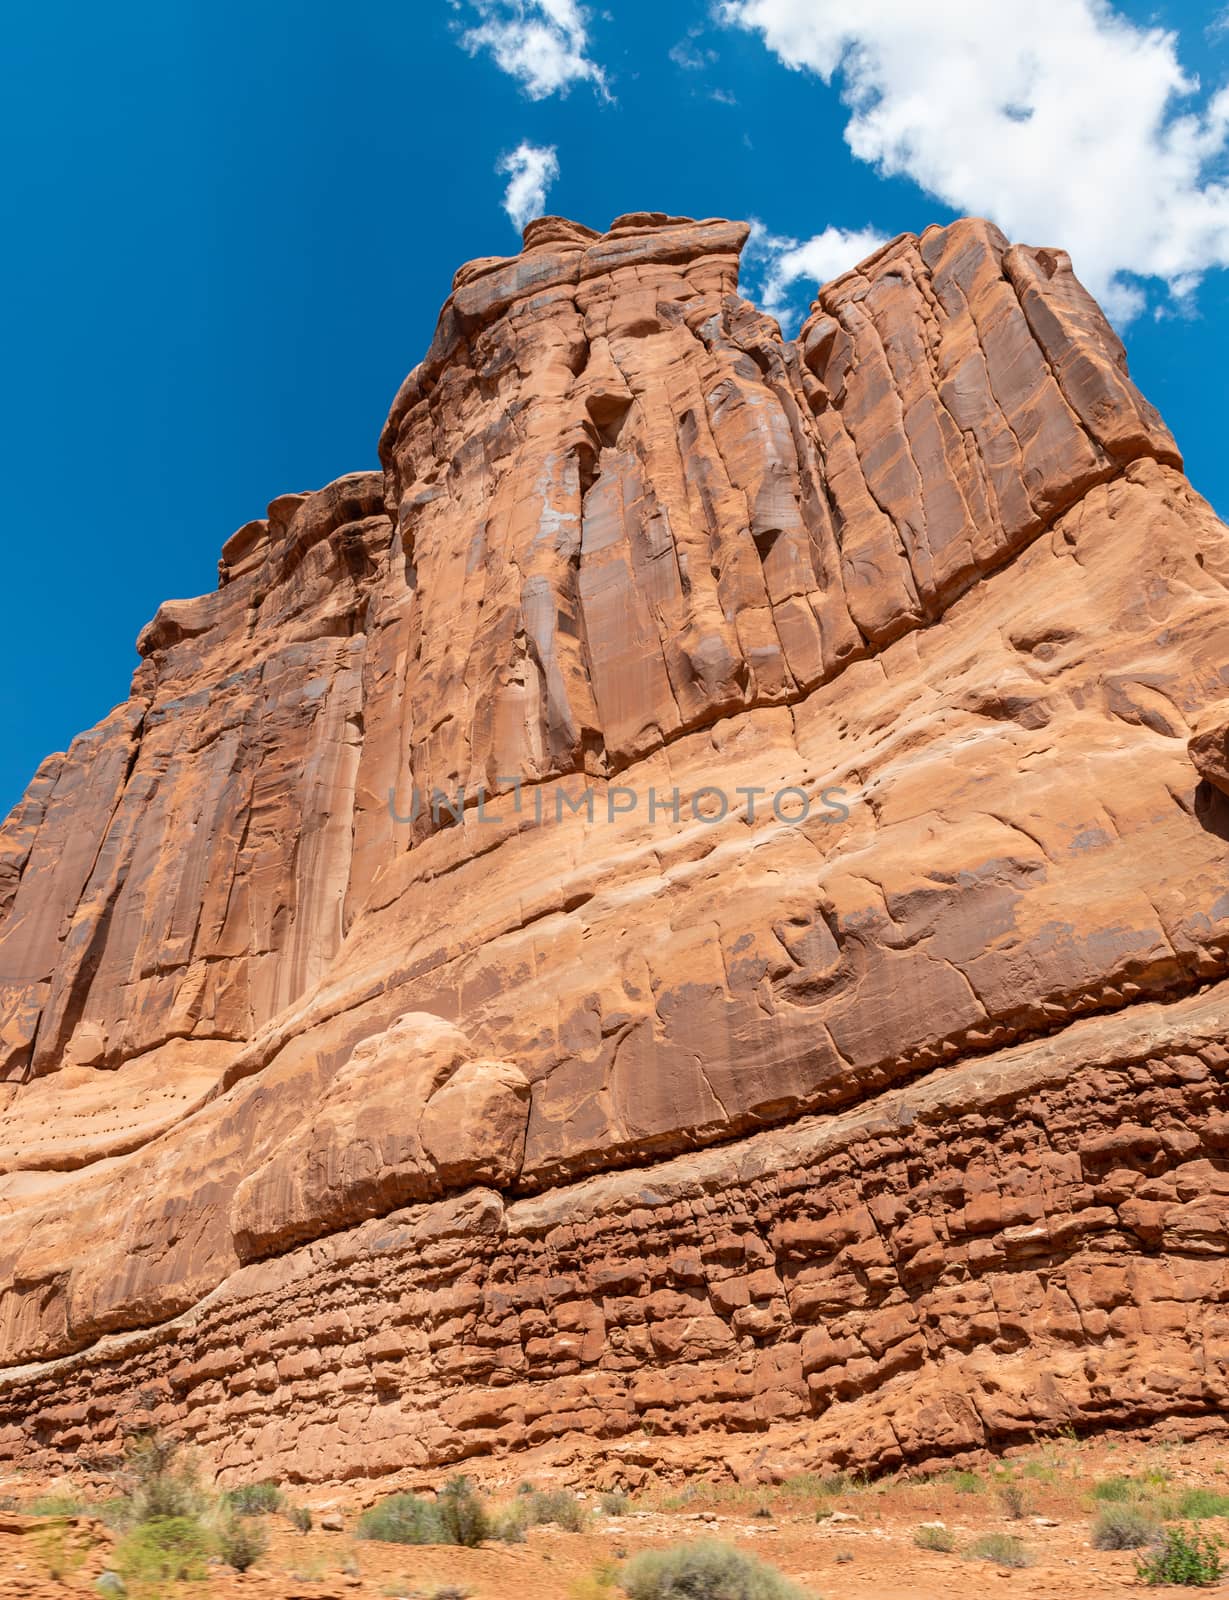 Sandstone formation in the entrance of Arches National Park, Utah